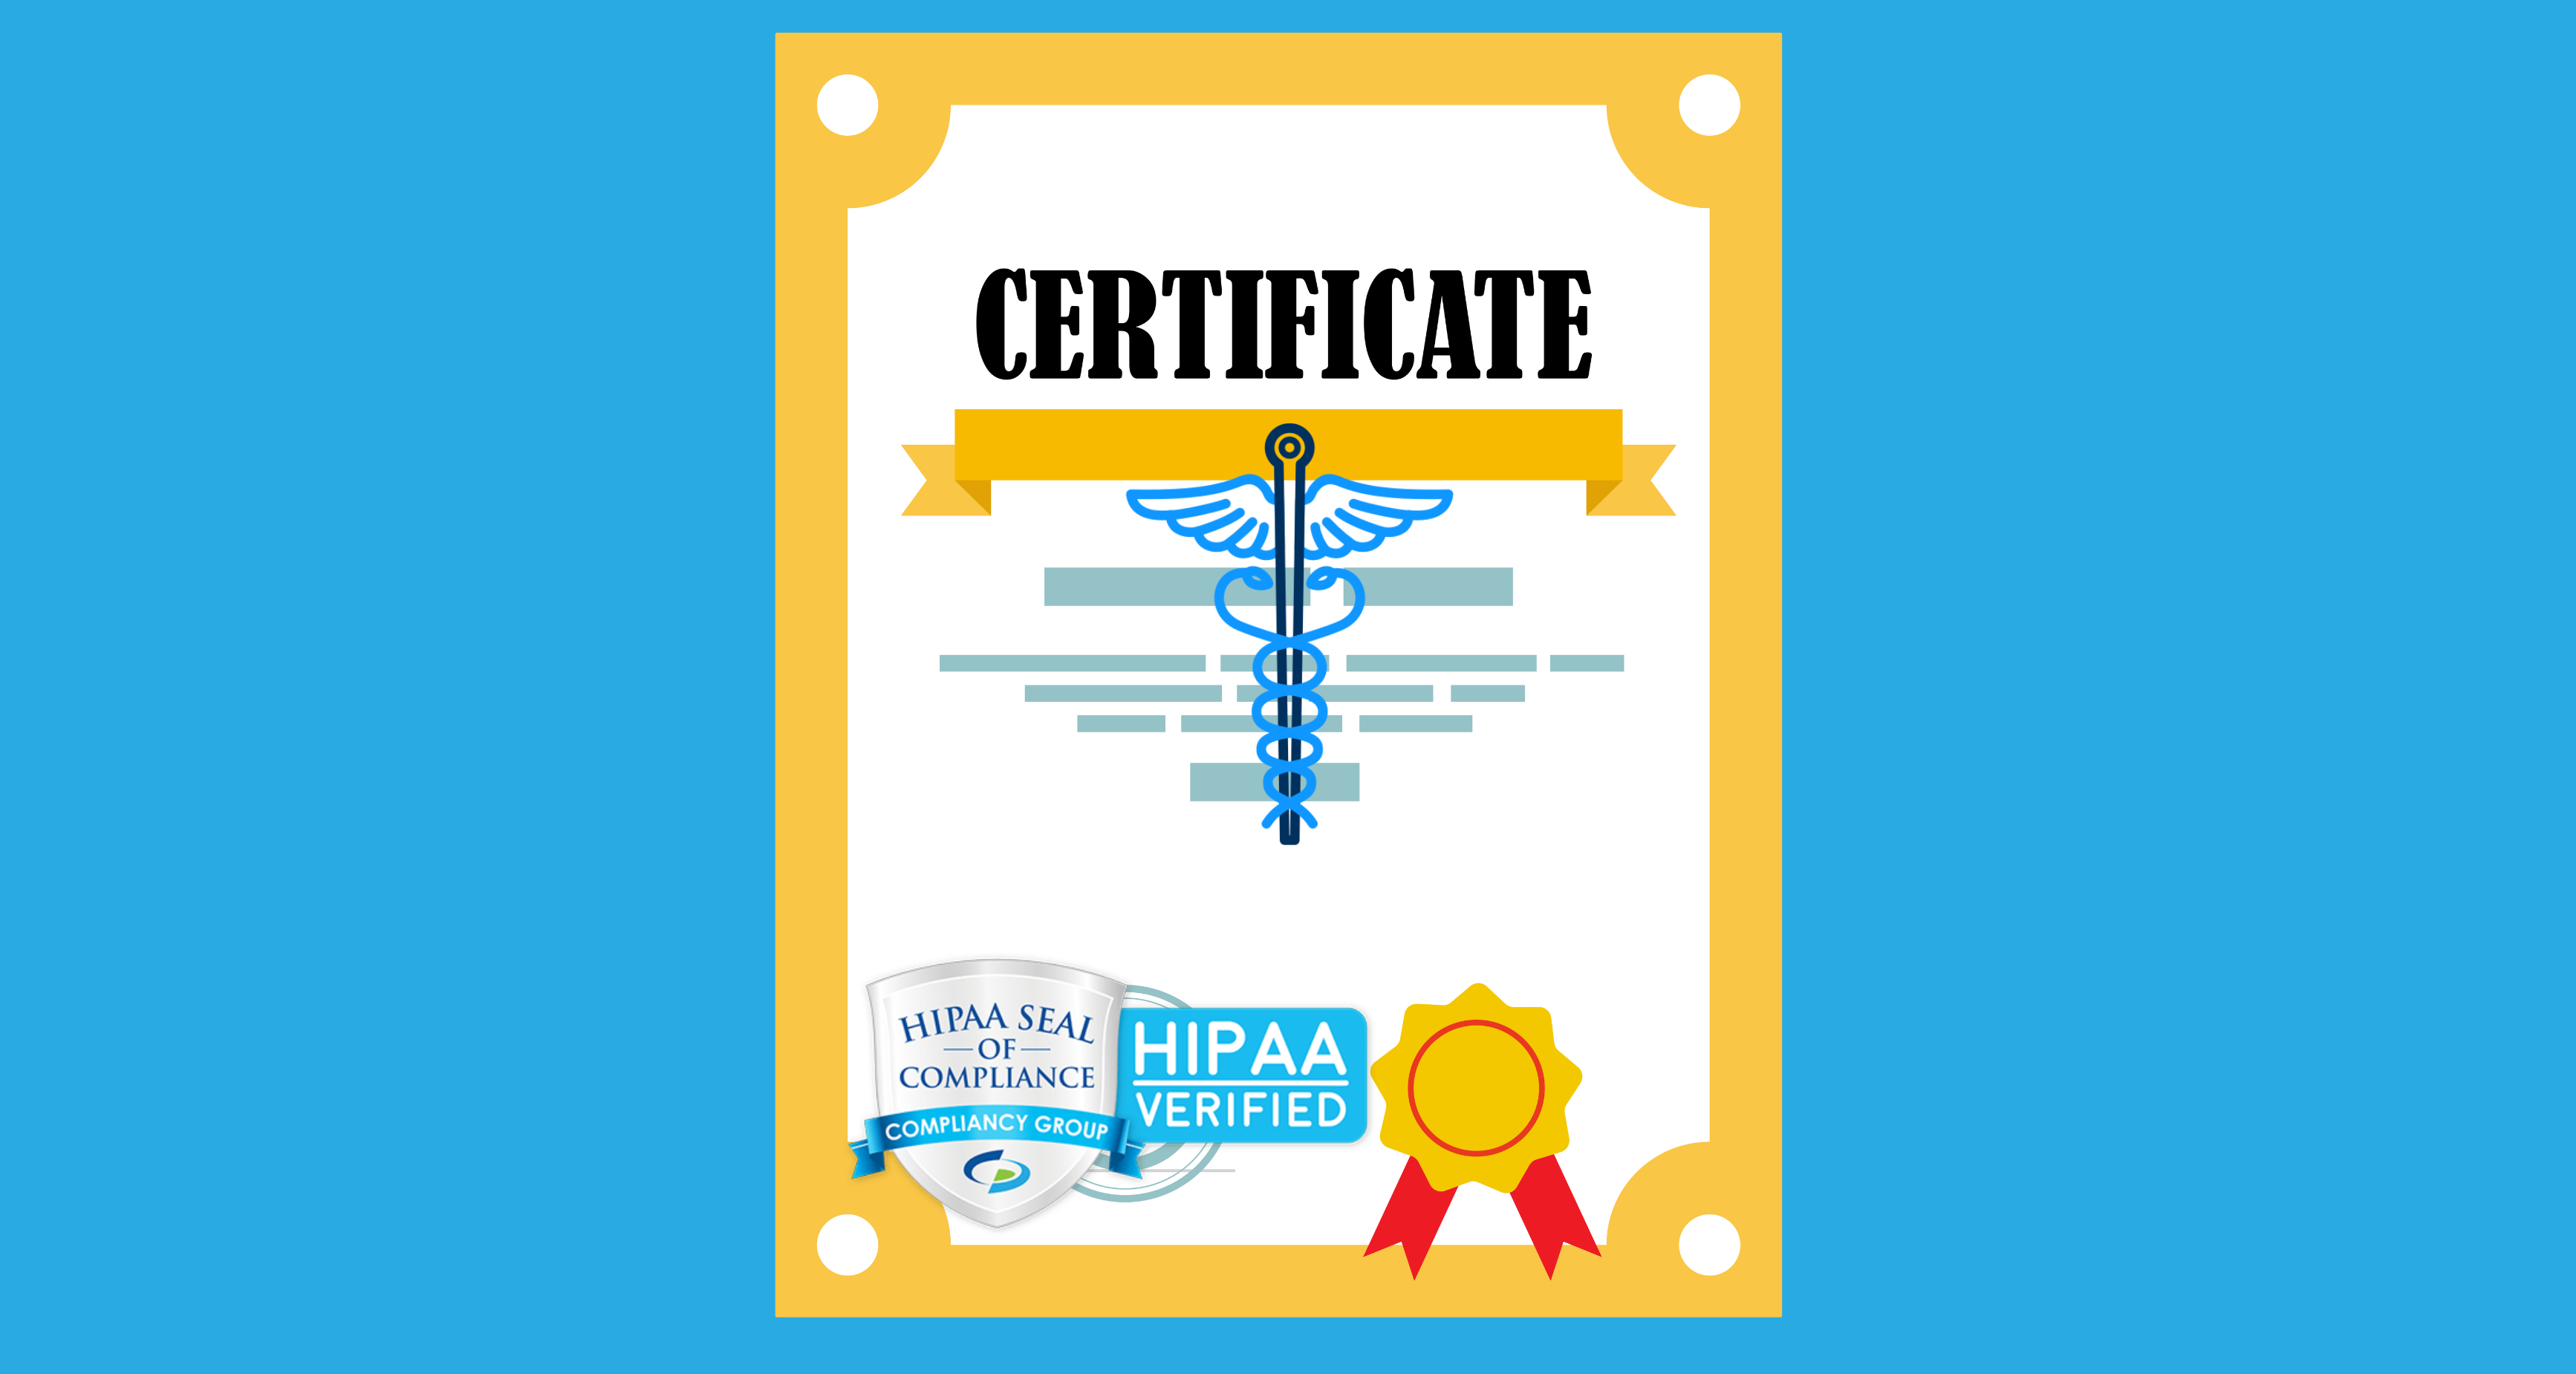 Get a HIPAA Compliance Certification Compliancy Group